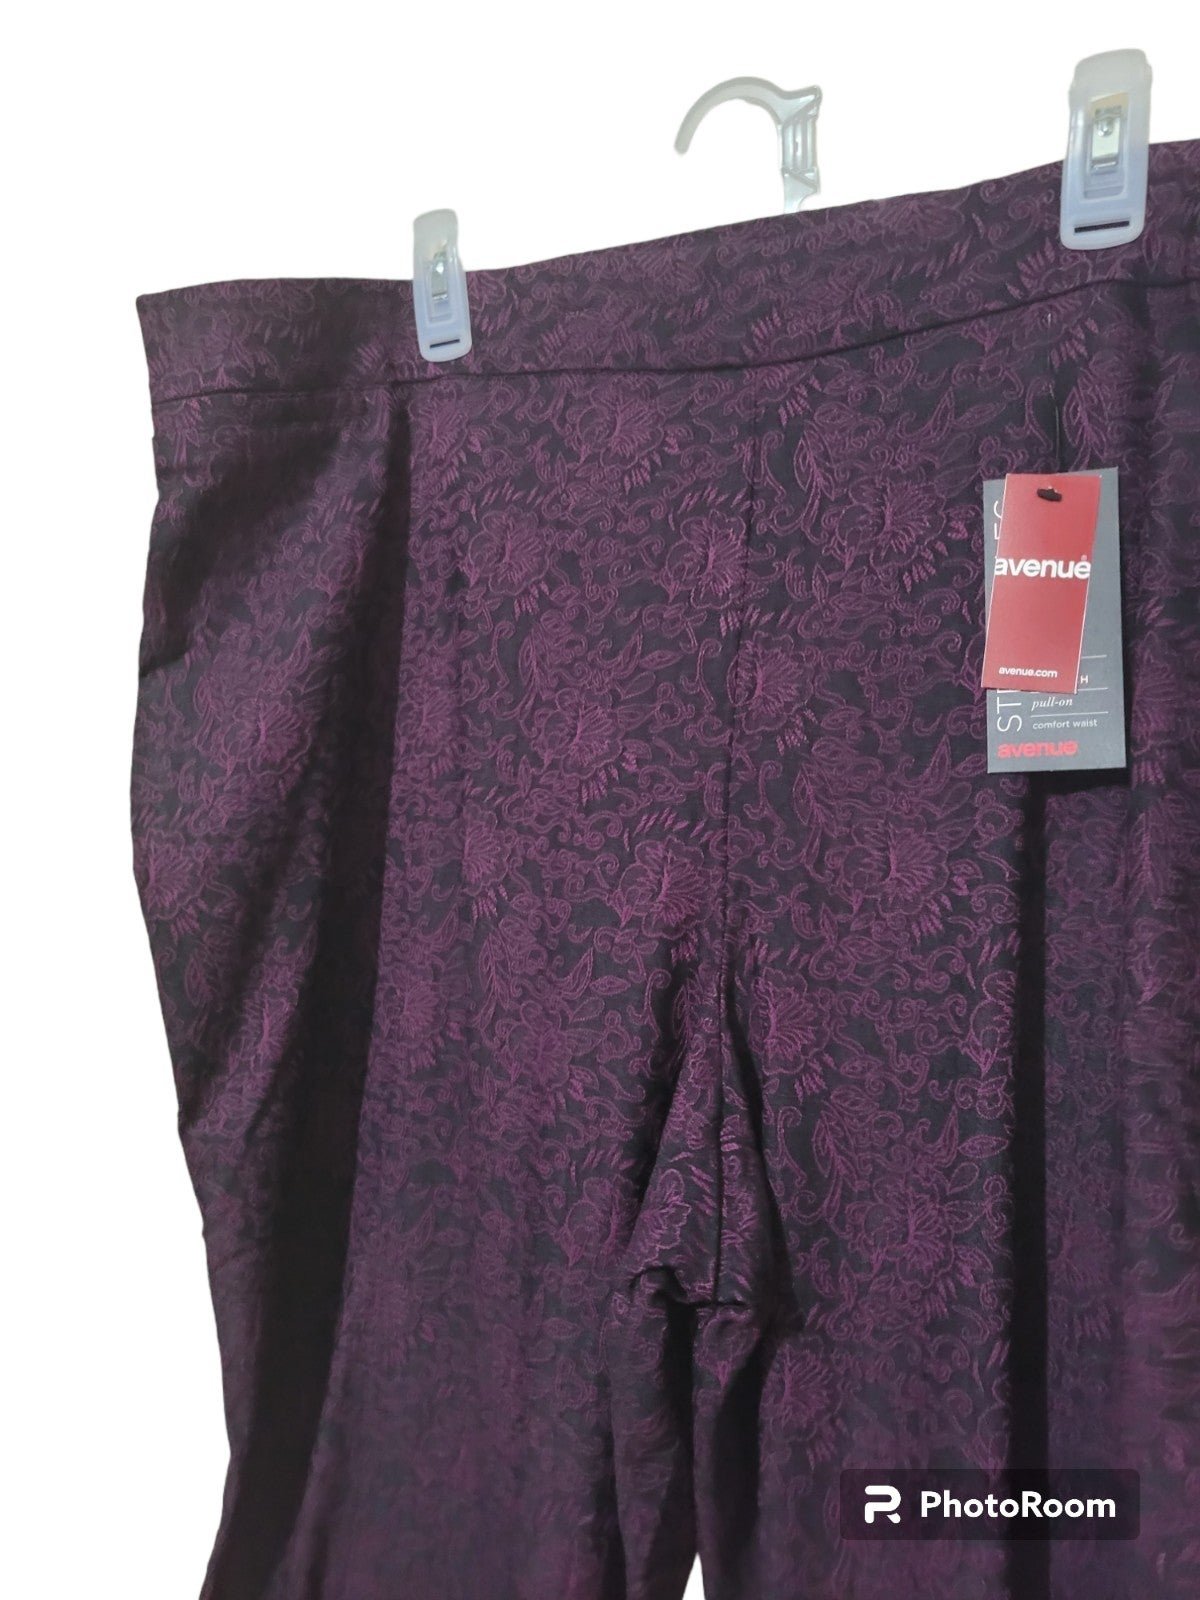 Factory Direct  NWT Avenue Super Stretch Twill Straight Leg Pull On Burgundy Pants Size 24 AVG Pe1p3eOKK US Outlet